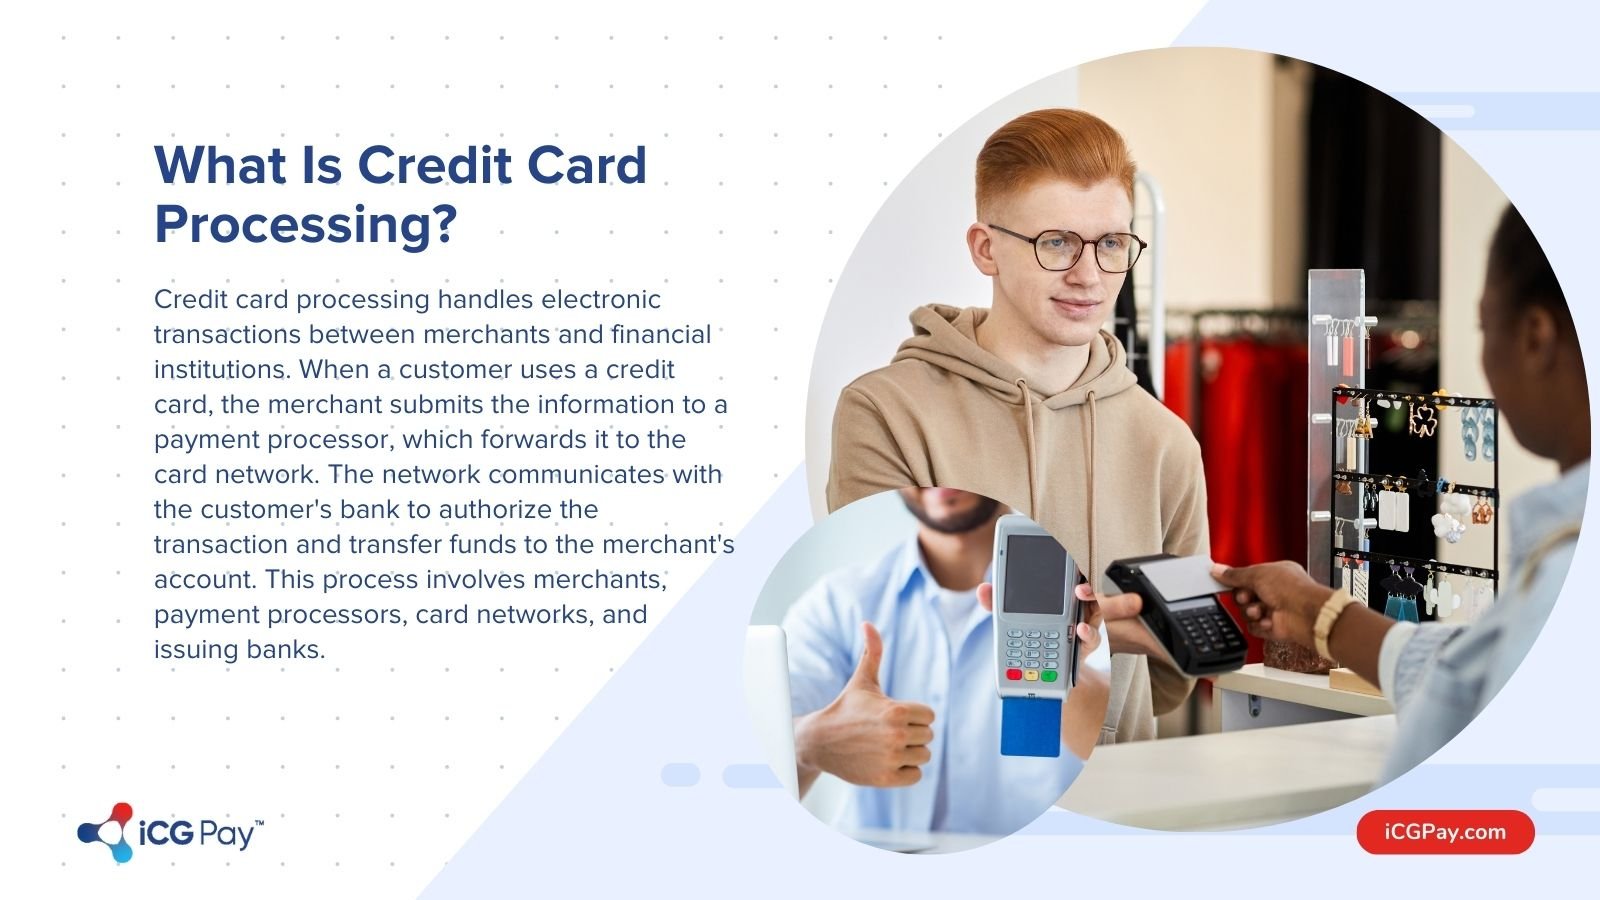 What is credit card processing